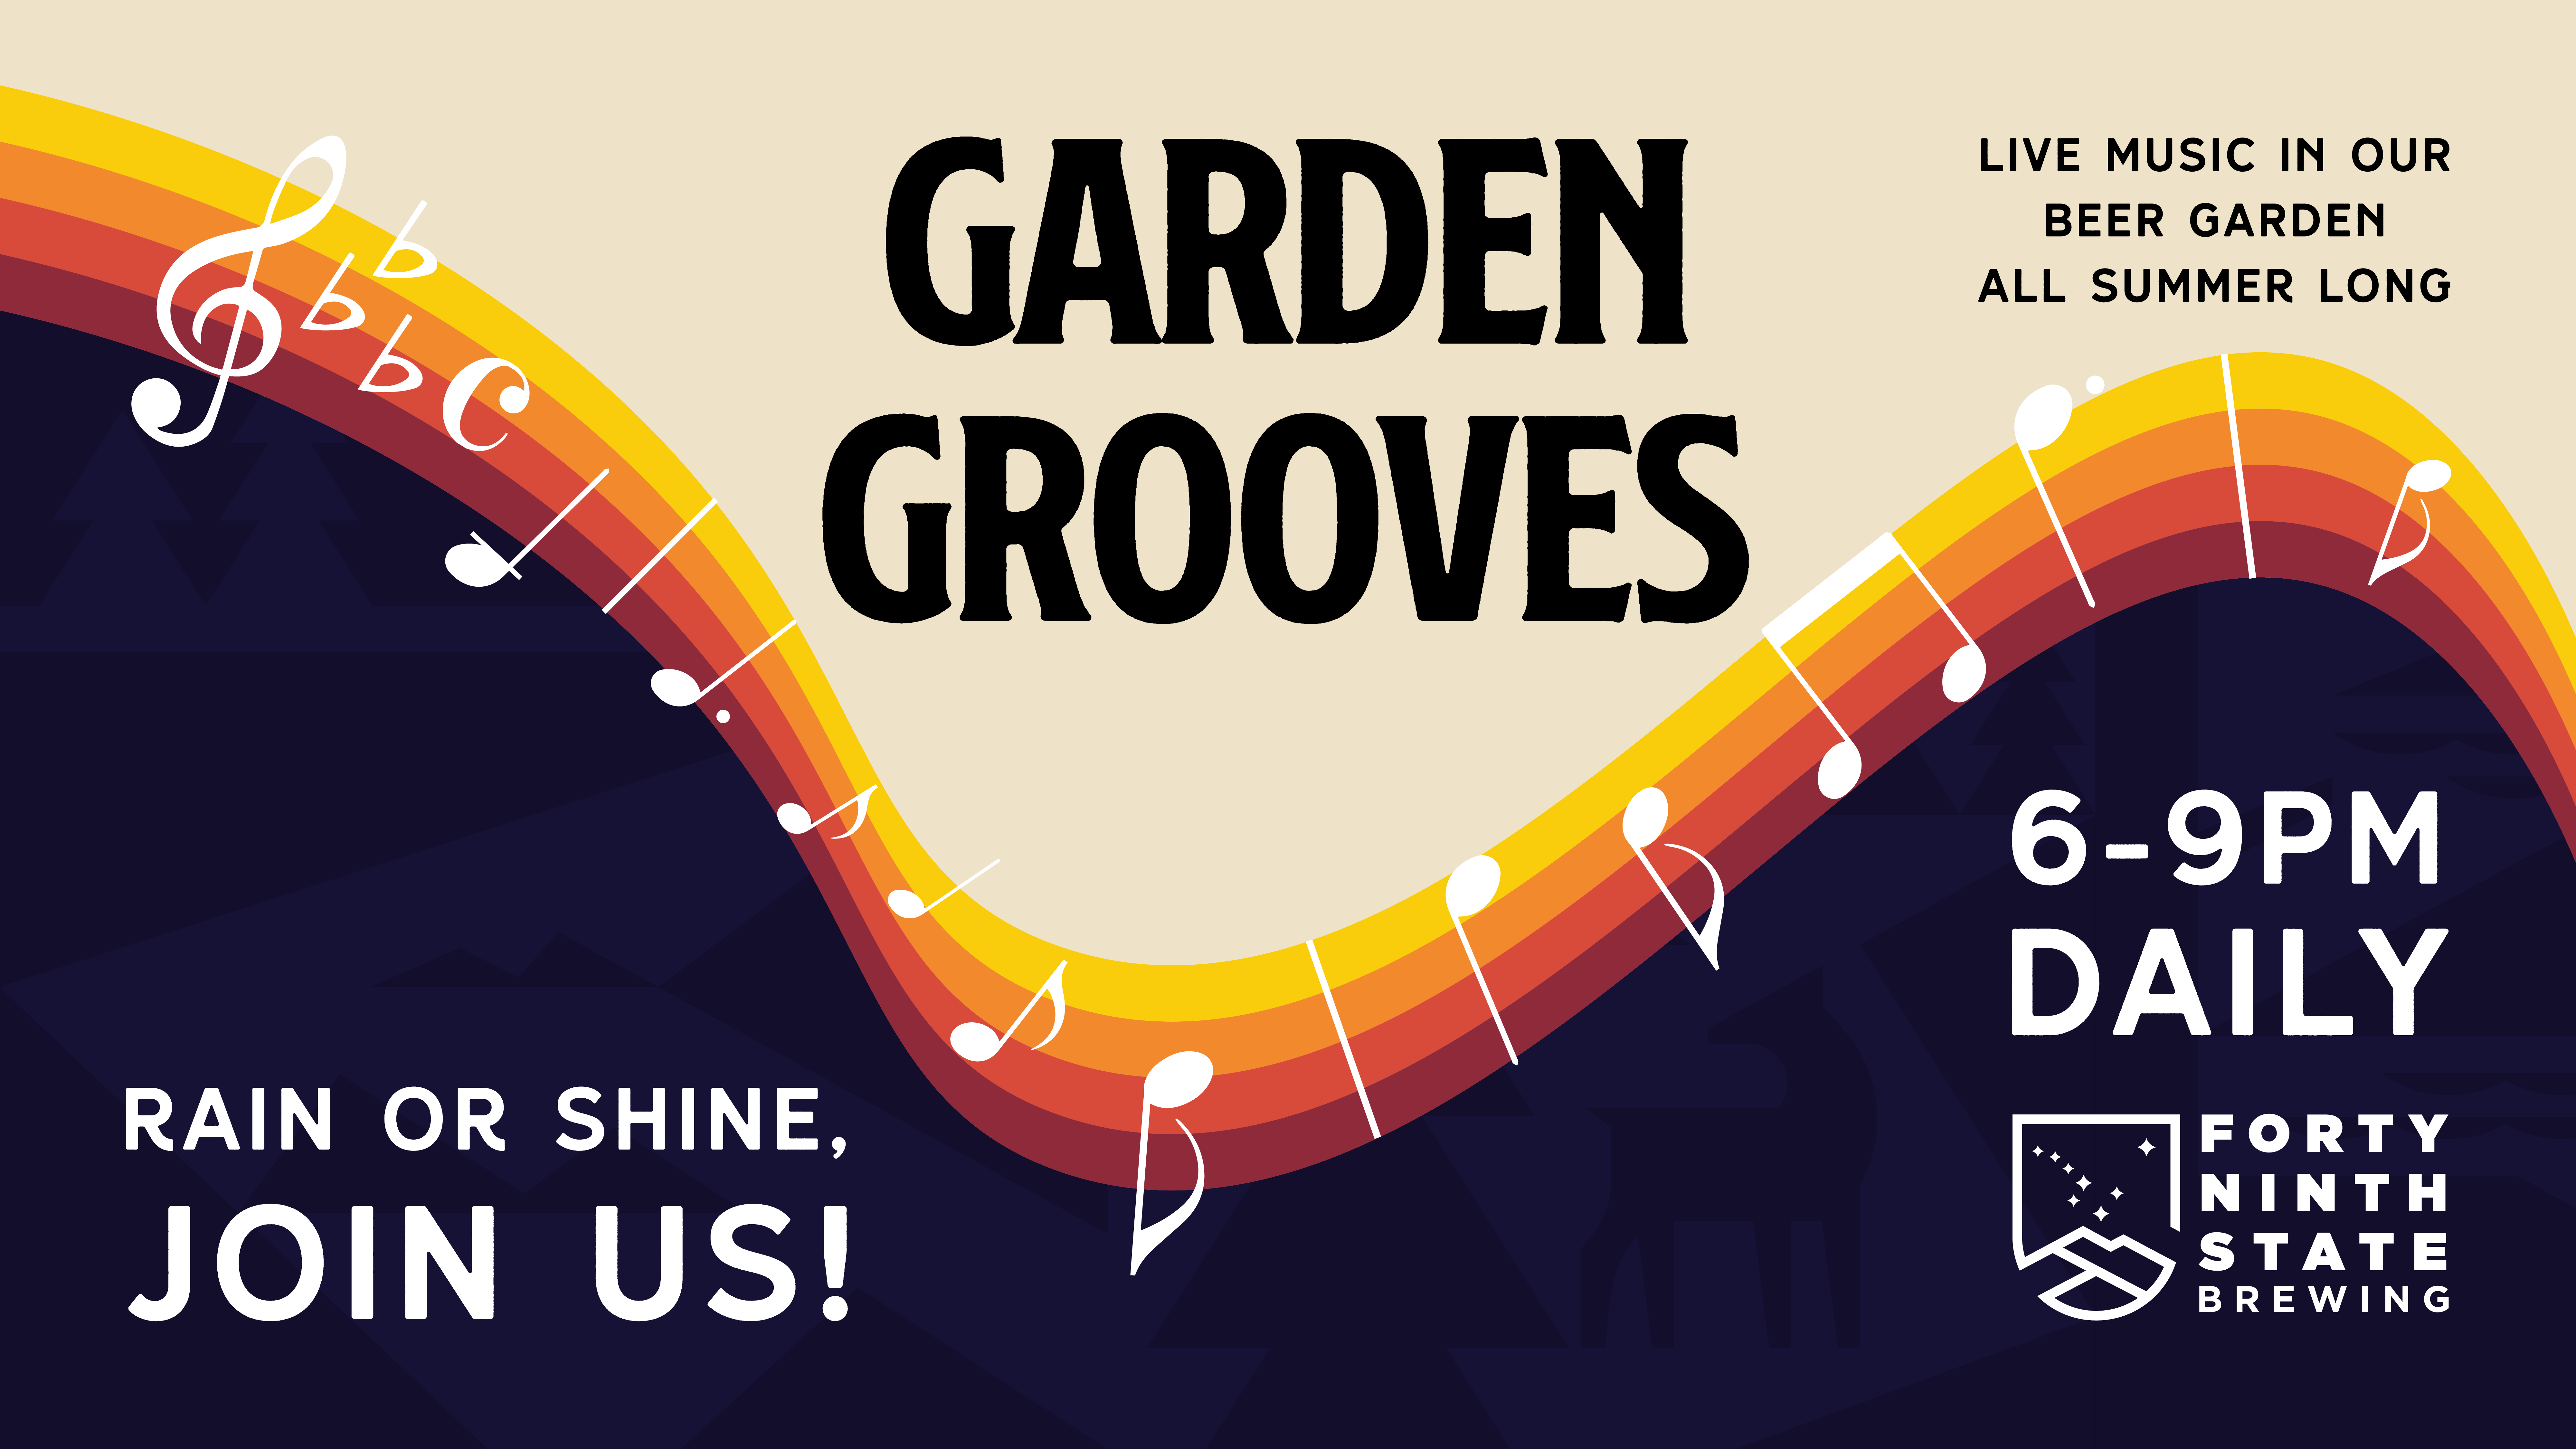 "Garden Grooves! Live music all summer long! Rain or shine, join us! 6-9pm daily" on a graphic of music notes flowing across the screen with a retro sunset flowing behind them